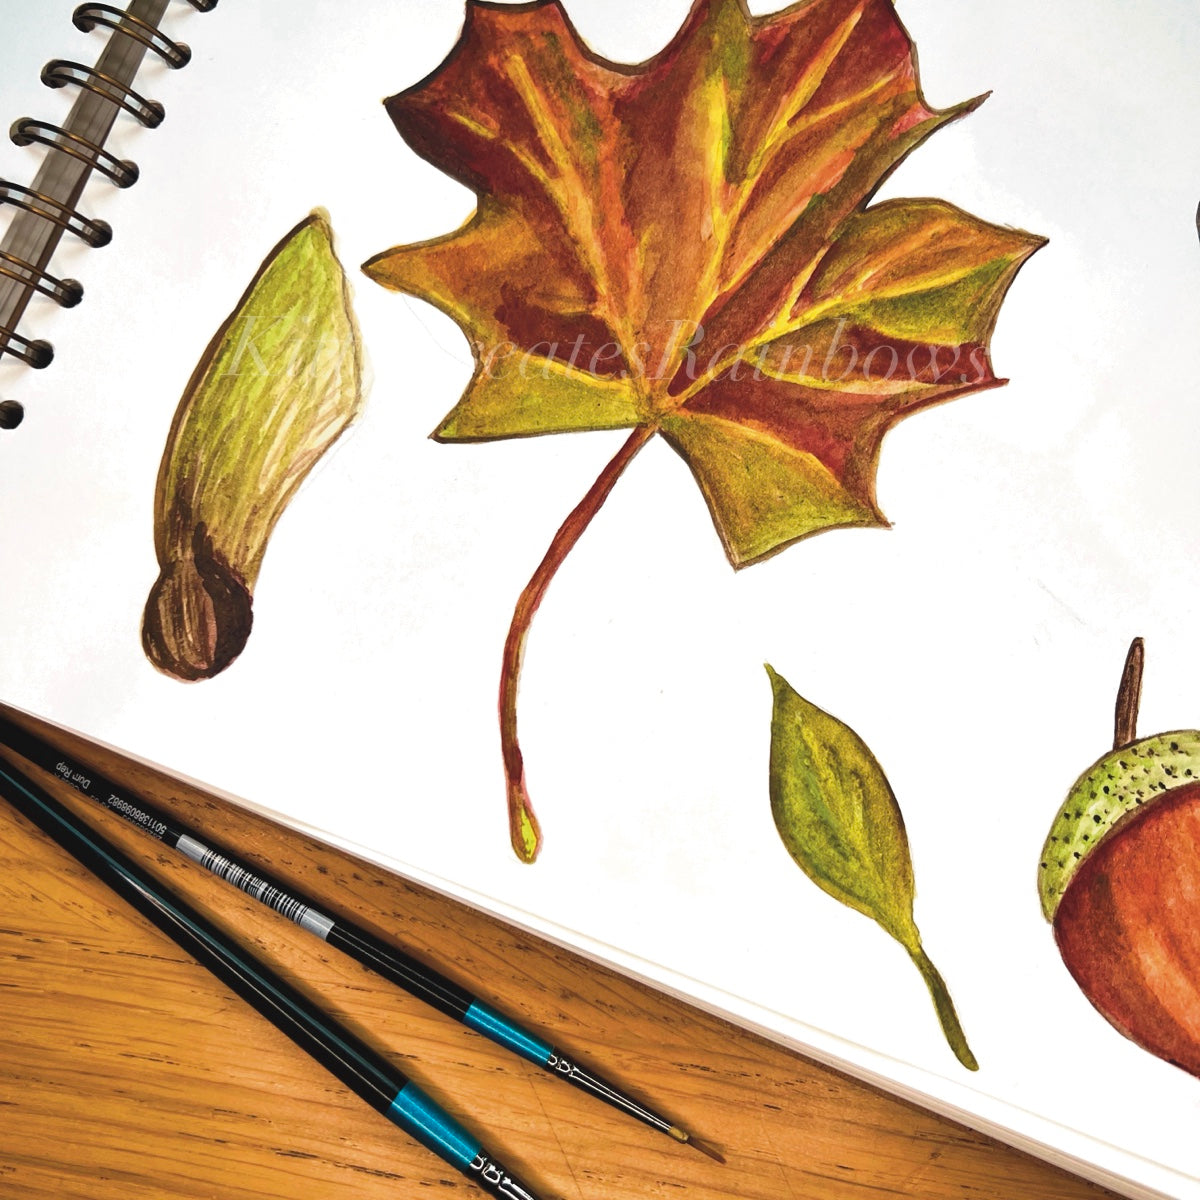 Watercolour paintings of brown maple leave, green sycamore seed and a tiny green leaf in a sketchbook page with paintbrushes laying next to the open sketchbook page, by Kat Lovatt